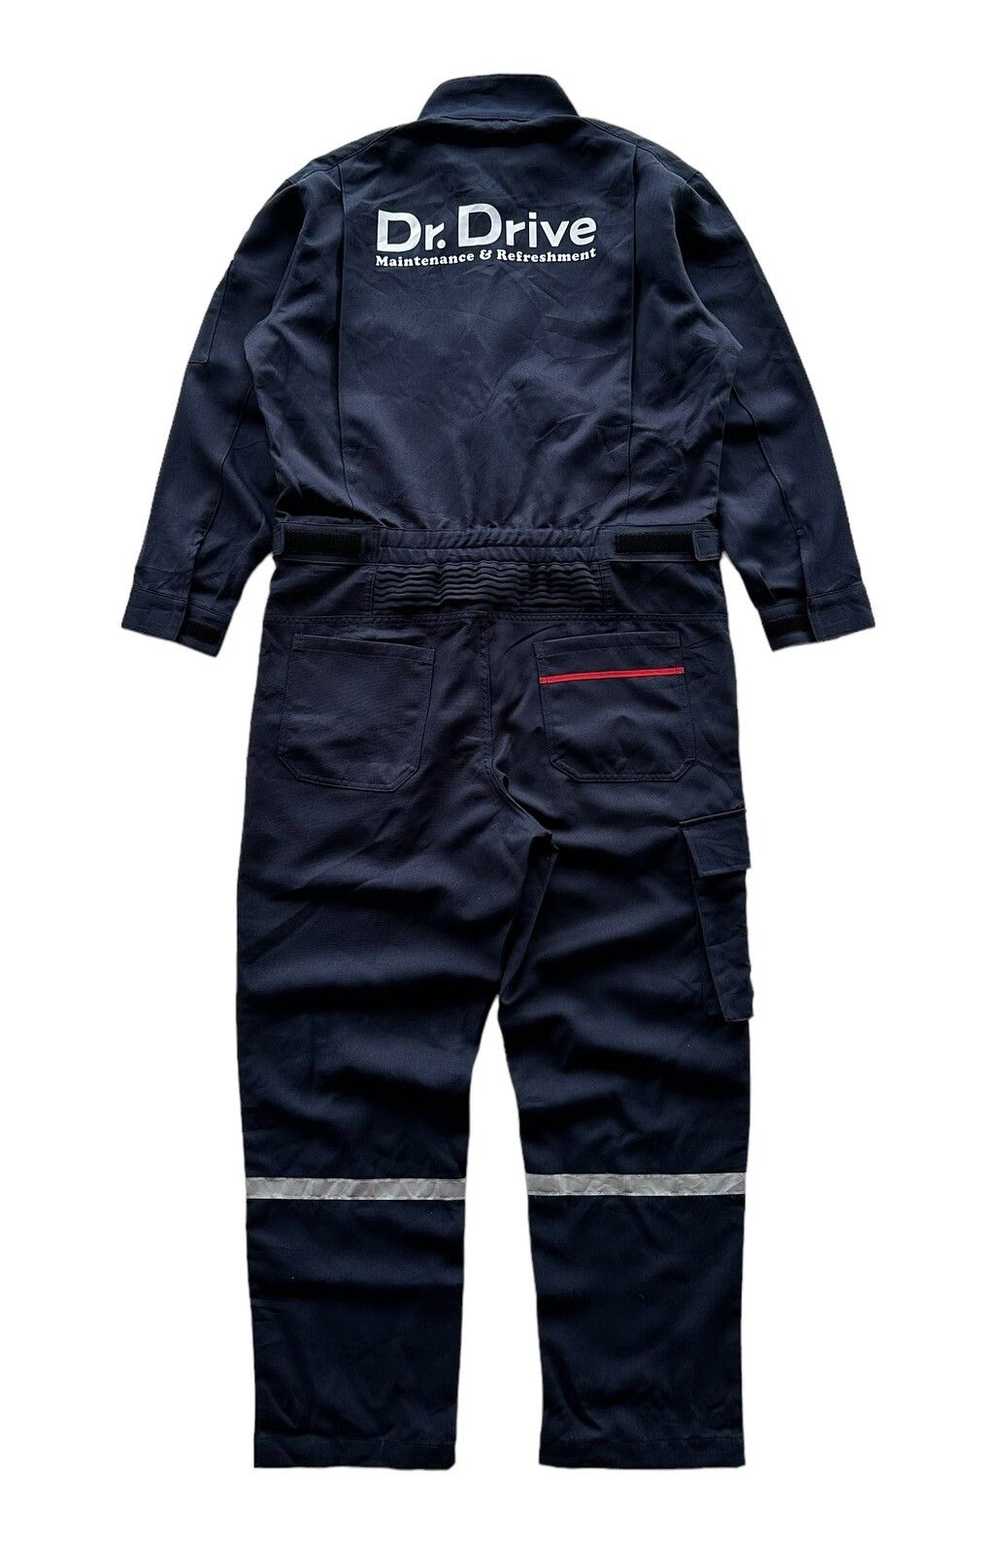 Overalls × Racing × Workers Eneos Overalls - image 3